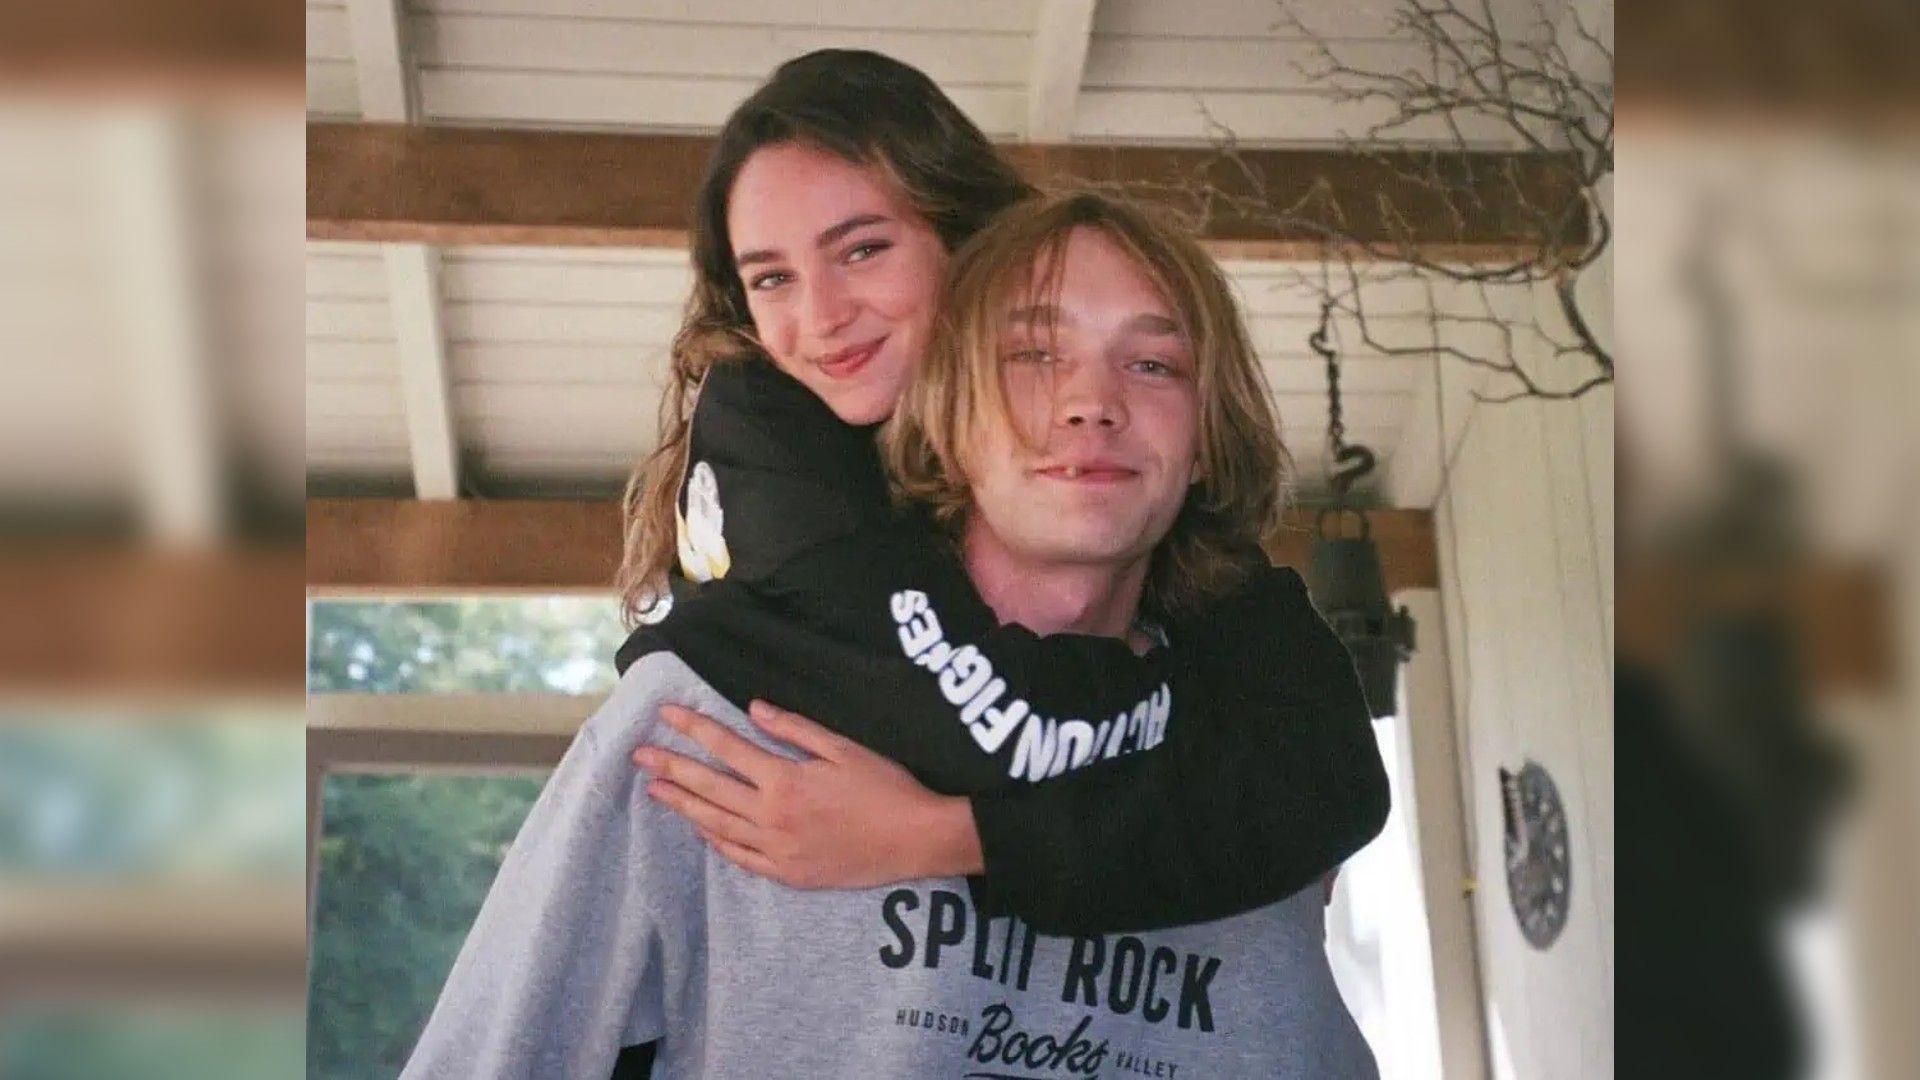 Charlie Plummer and Lizzie Swanson